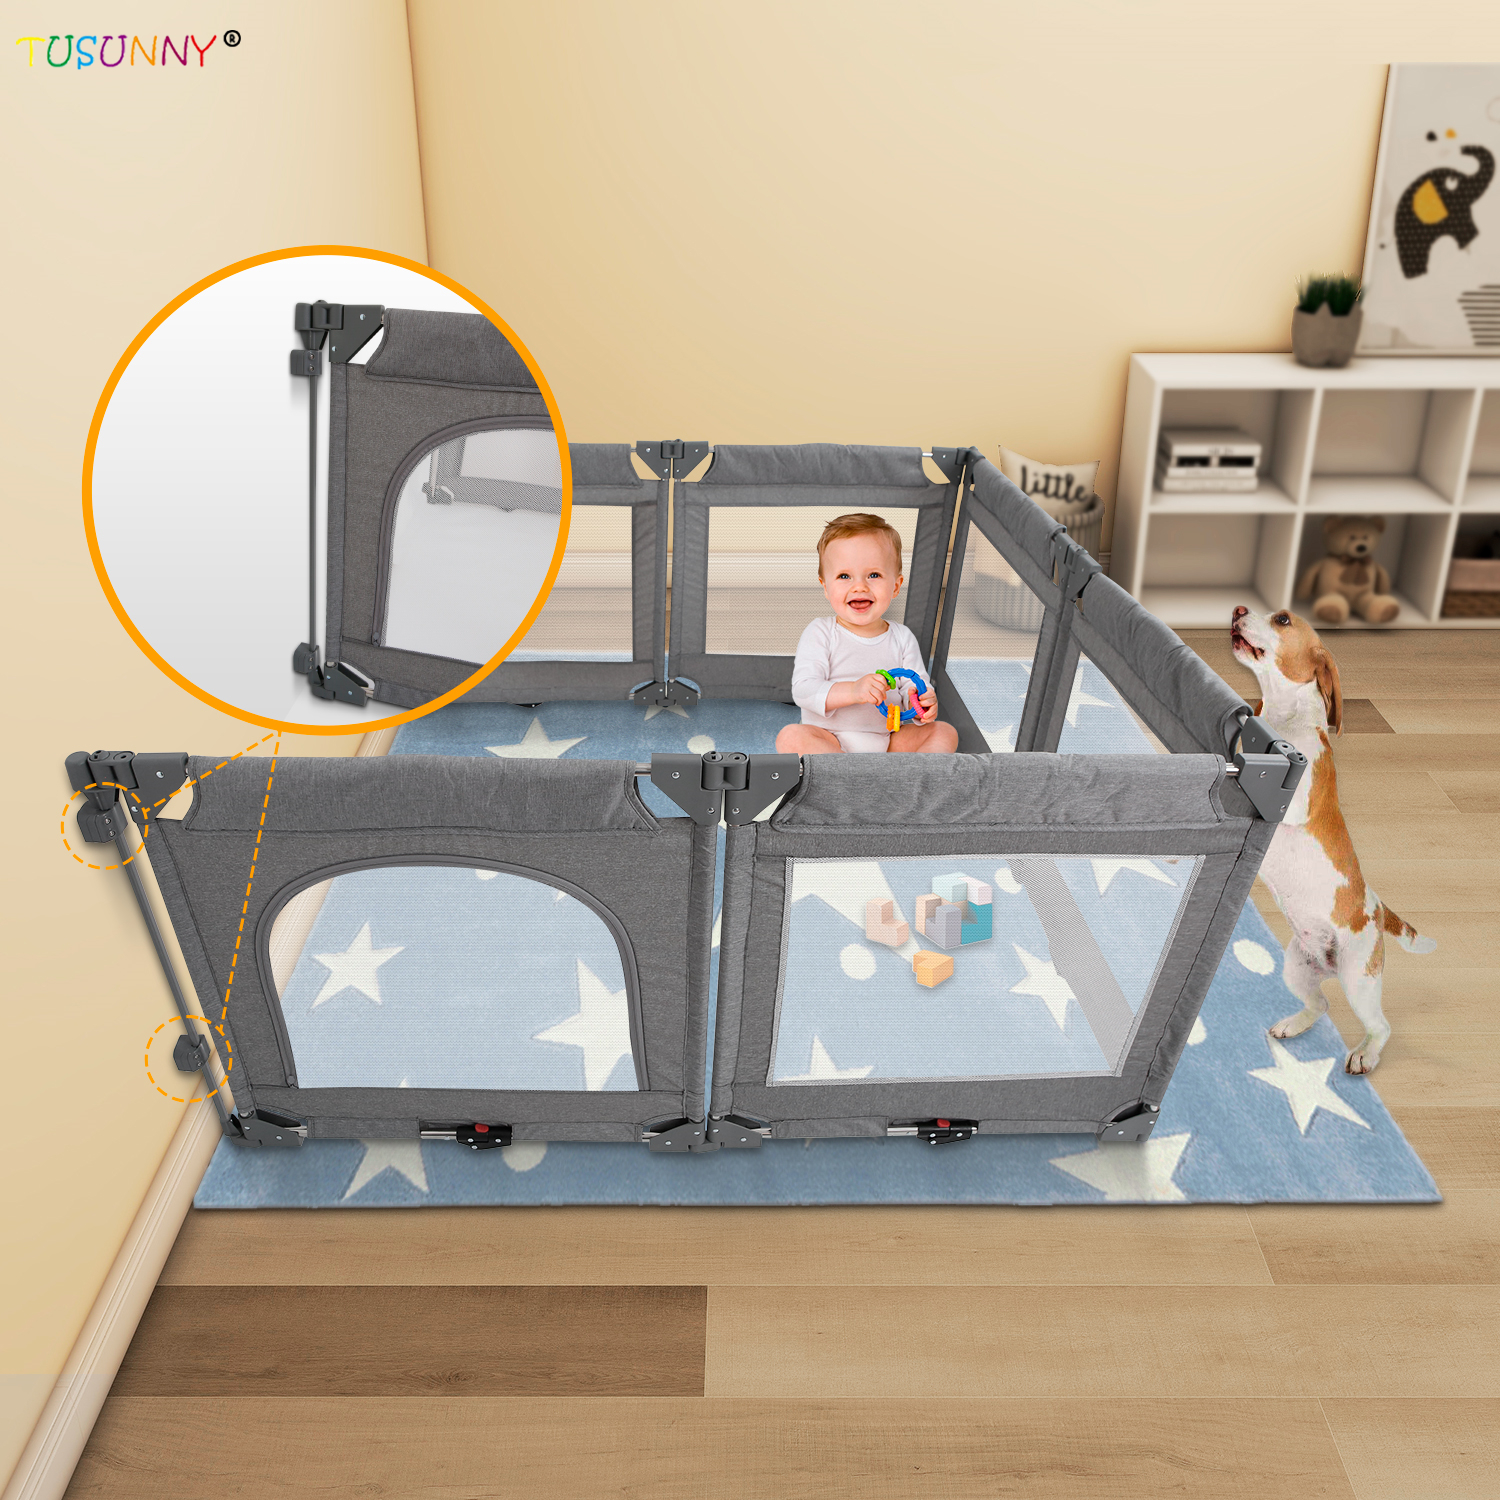 SH1.412B New Redesign Baby Sheet Playpen Foldable Baby Safety Playpen